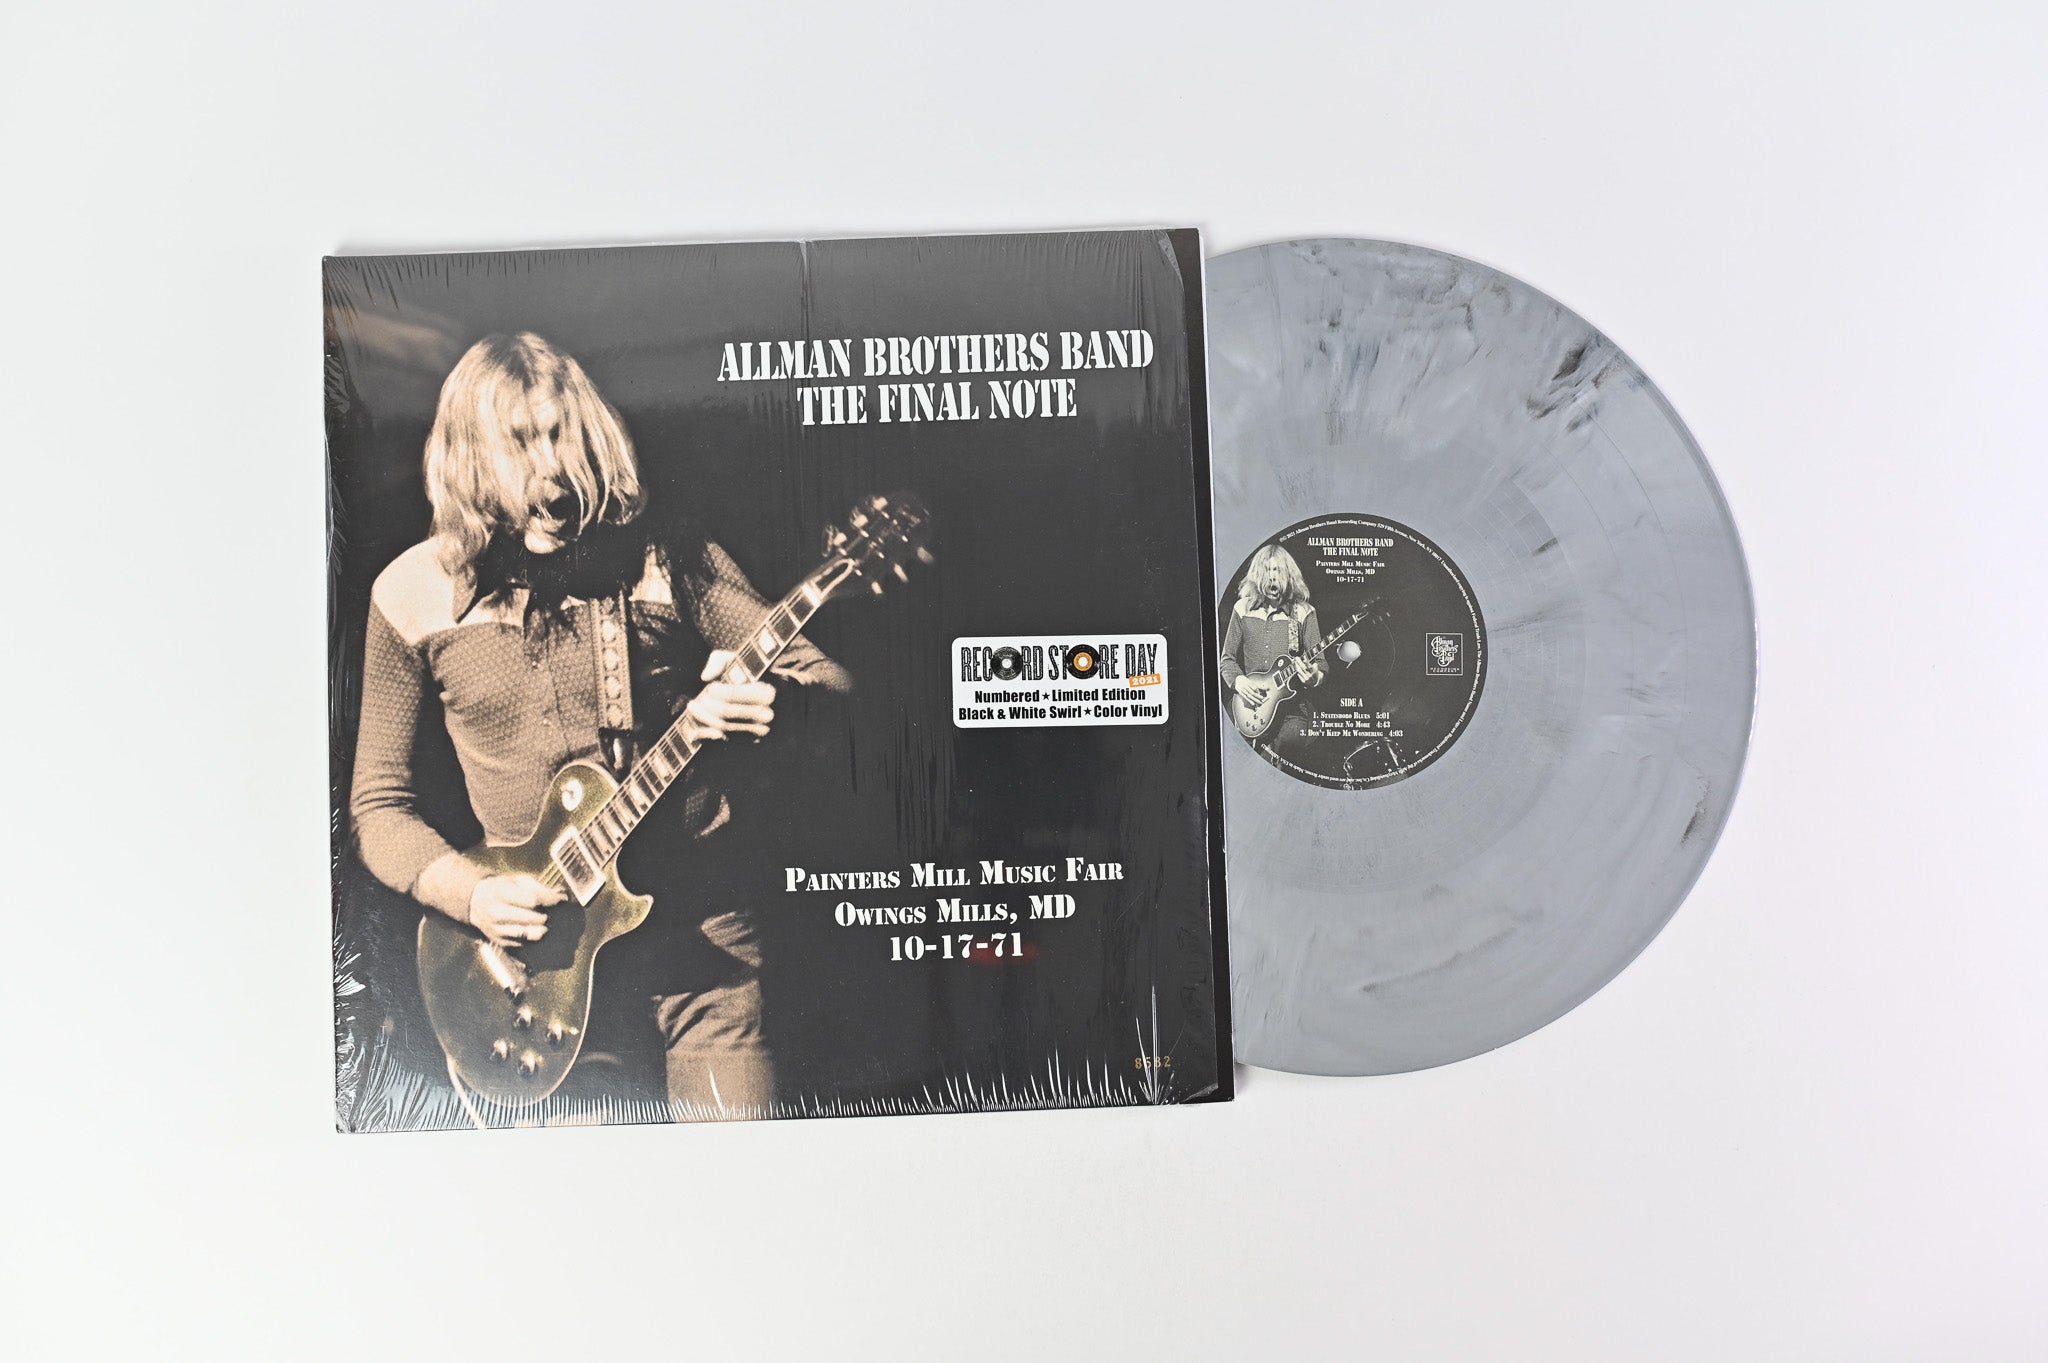 The Allman Brothers Band - The Final Note (Painters Mill Music Fair Owings Mills, MD 10-17-71) Ltd RSD Black & White Swirl